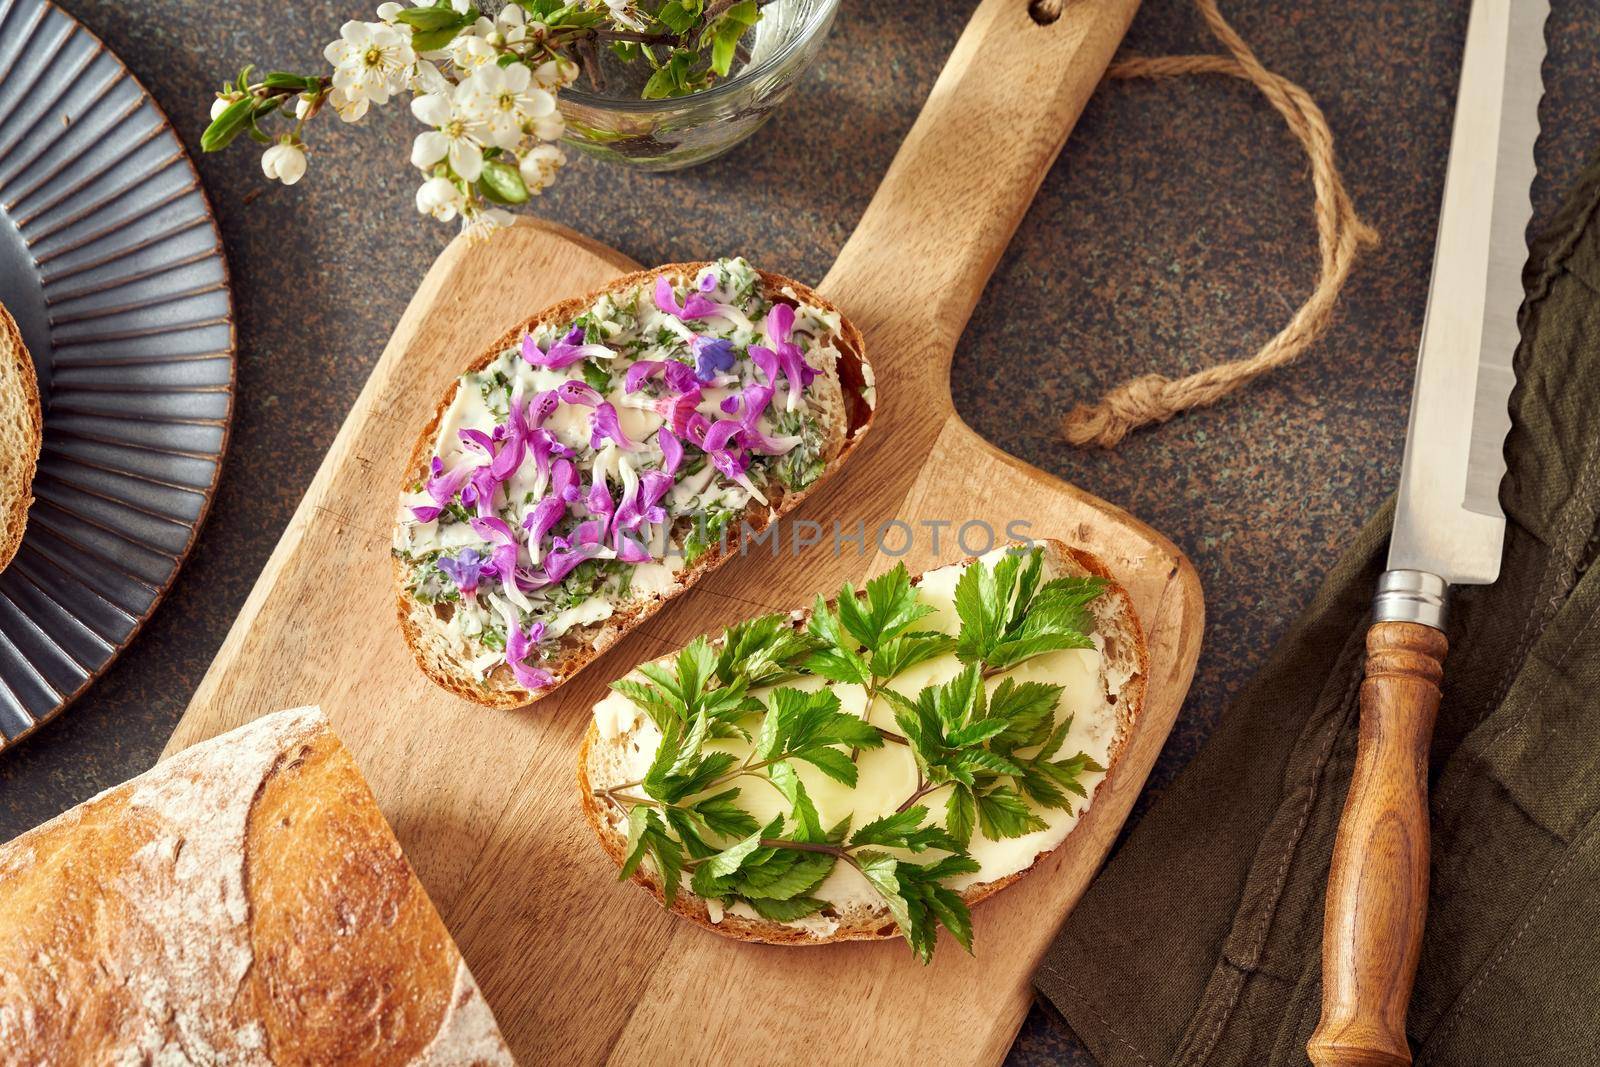 Sourdough bread with wild edible spring plants - young leaves of goutweed, purple dead-nettle and lungwort flowers by madeleine_steinbach